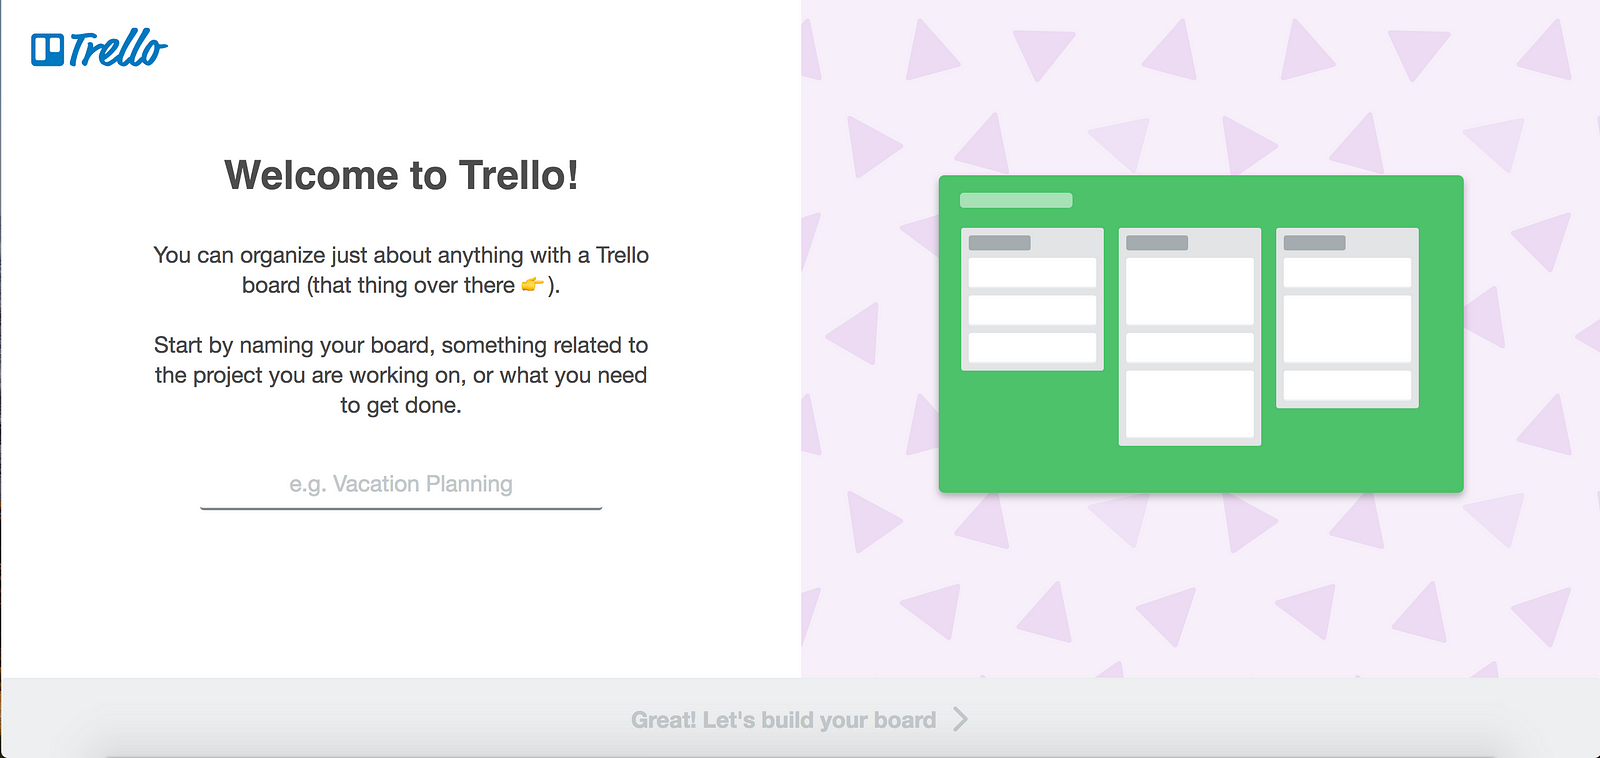 4 Simple Welcome Messages To Make The Most Of User Onboarding.